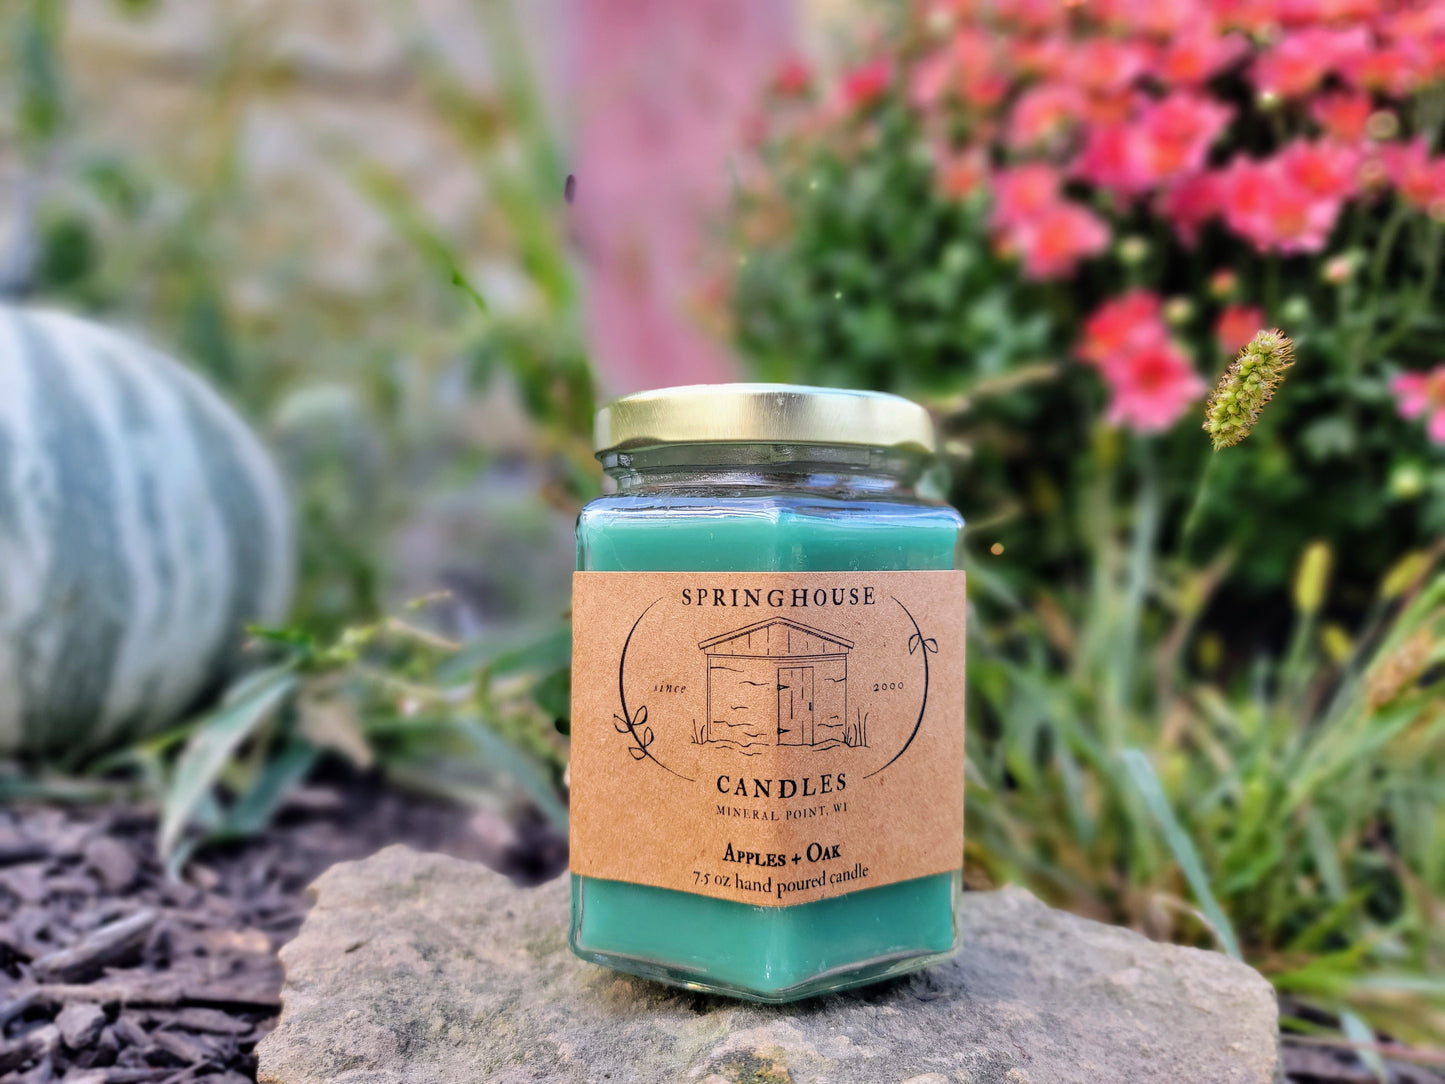 Apples + Oak 7.5 oz Hand Poured Candle